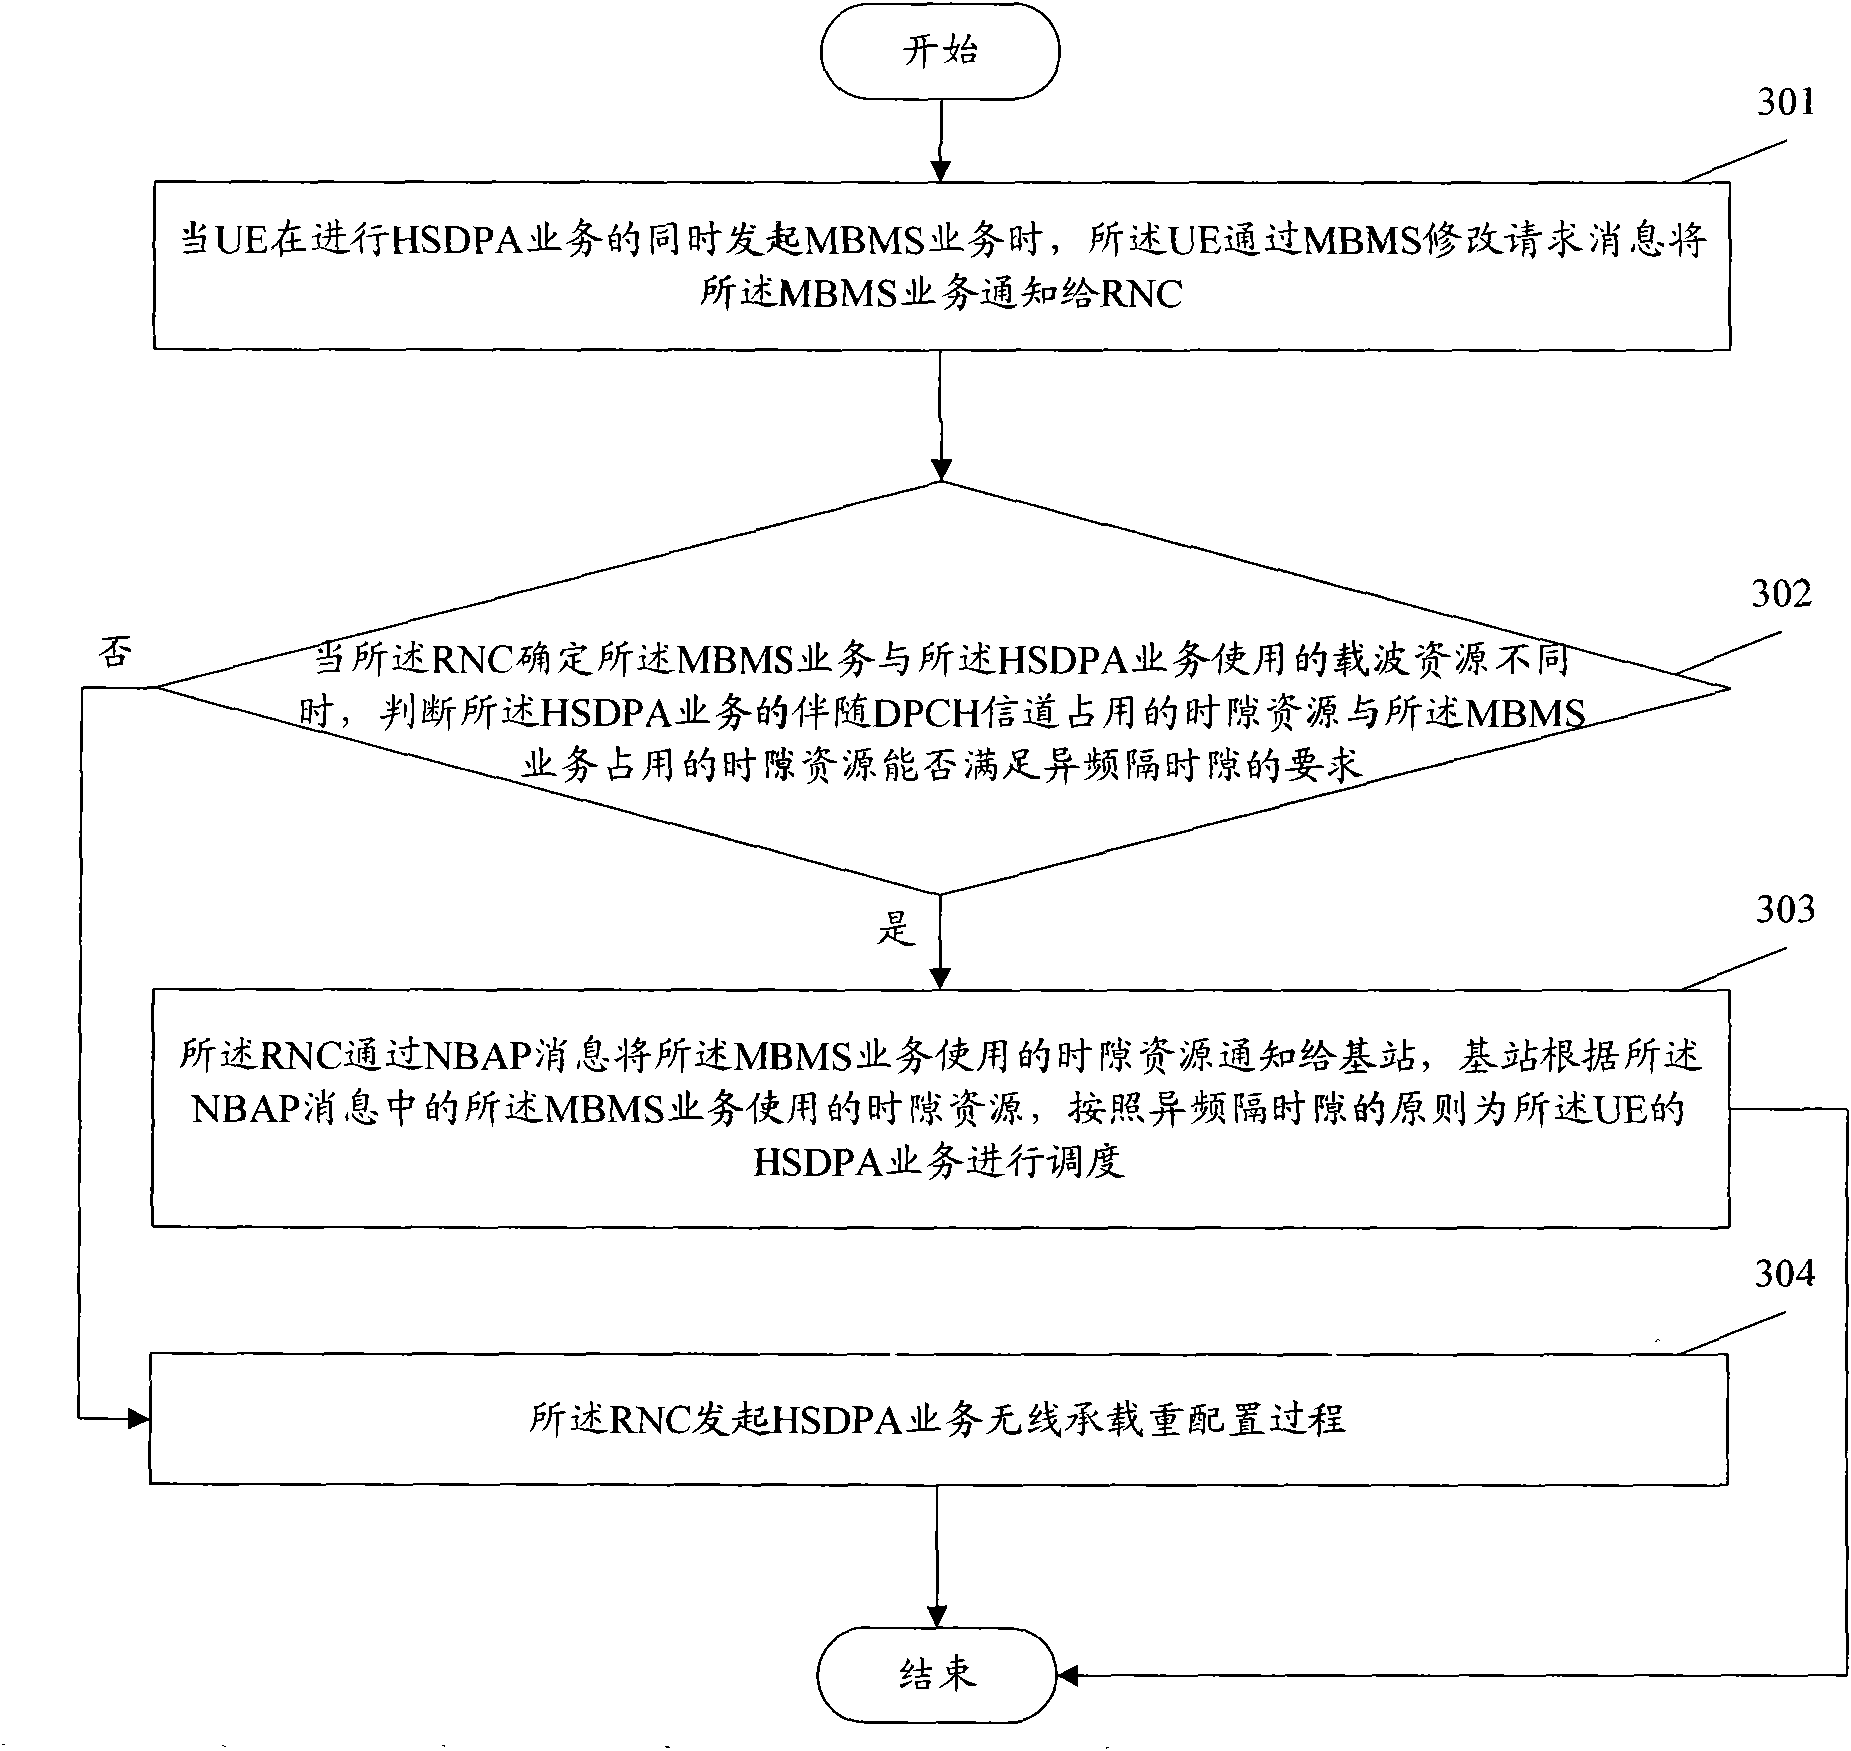 Method of jointly initiating high-speed downlink packet access (HSDPA) service and multimedia broadcast multicast service (MBMS)